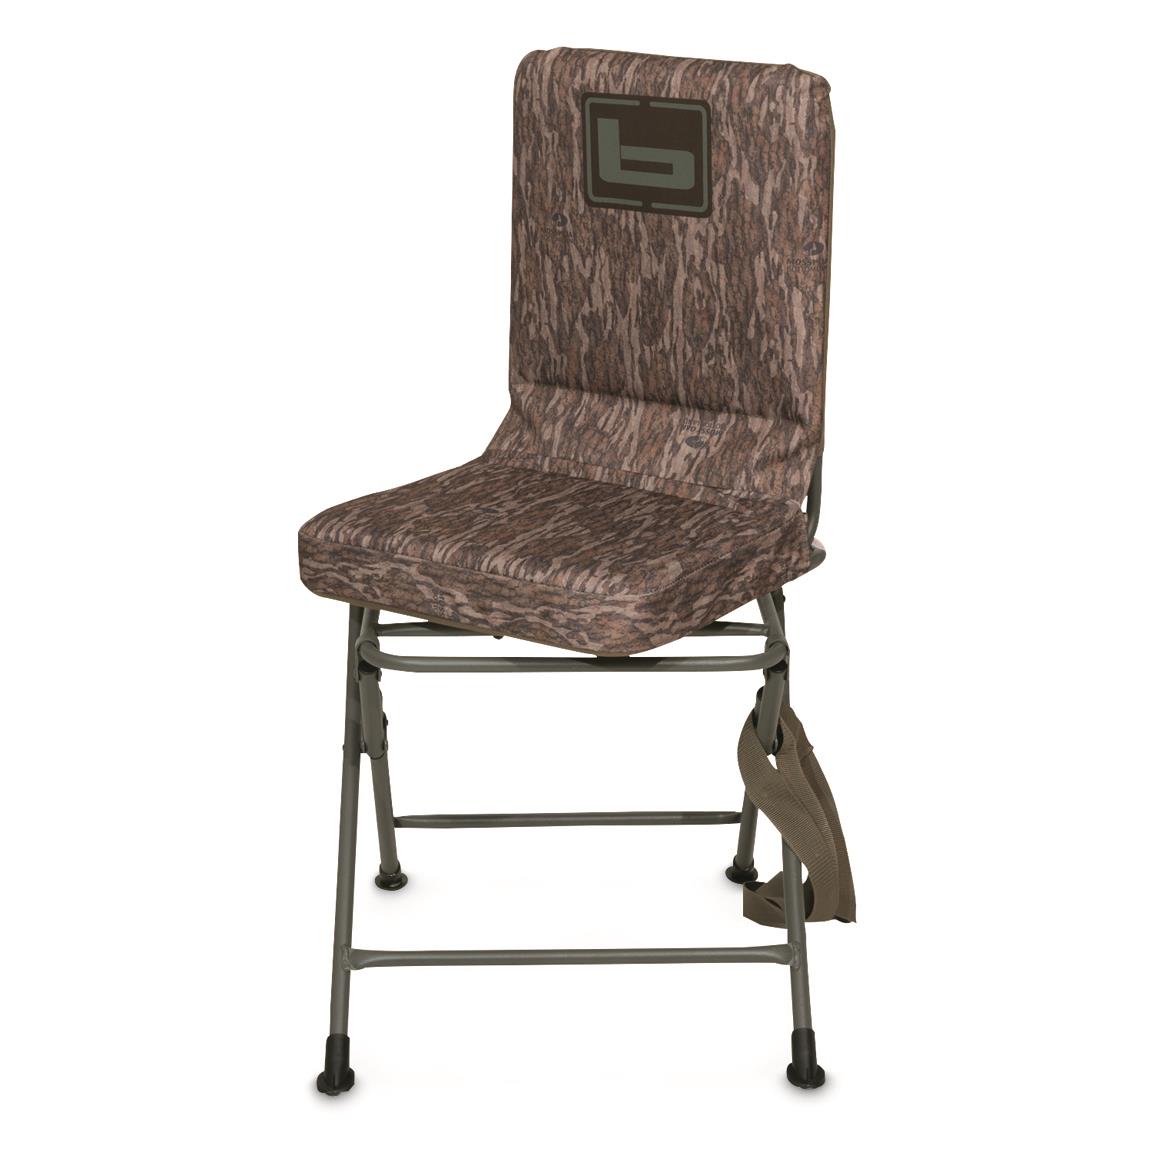 Banded Tall Swivel Blind Chair, Mossy Oak Bottomland®